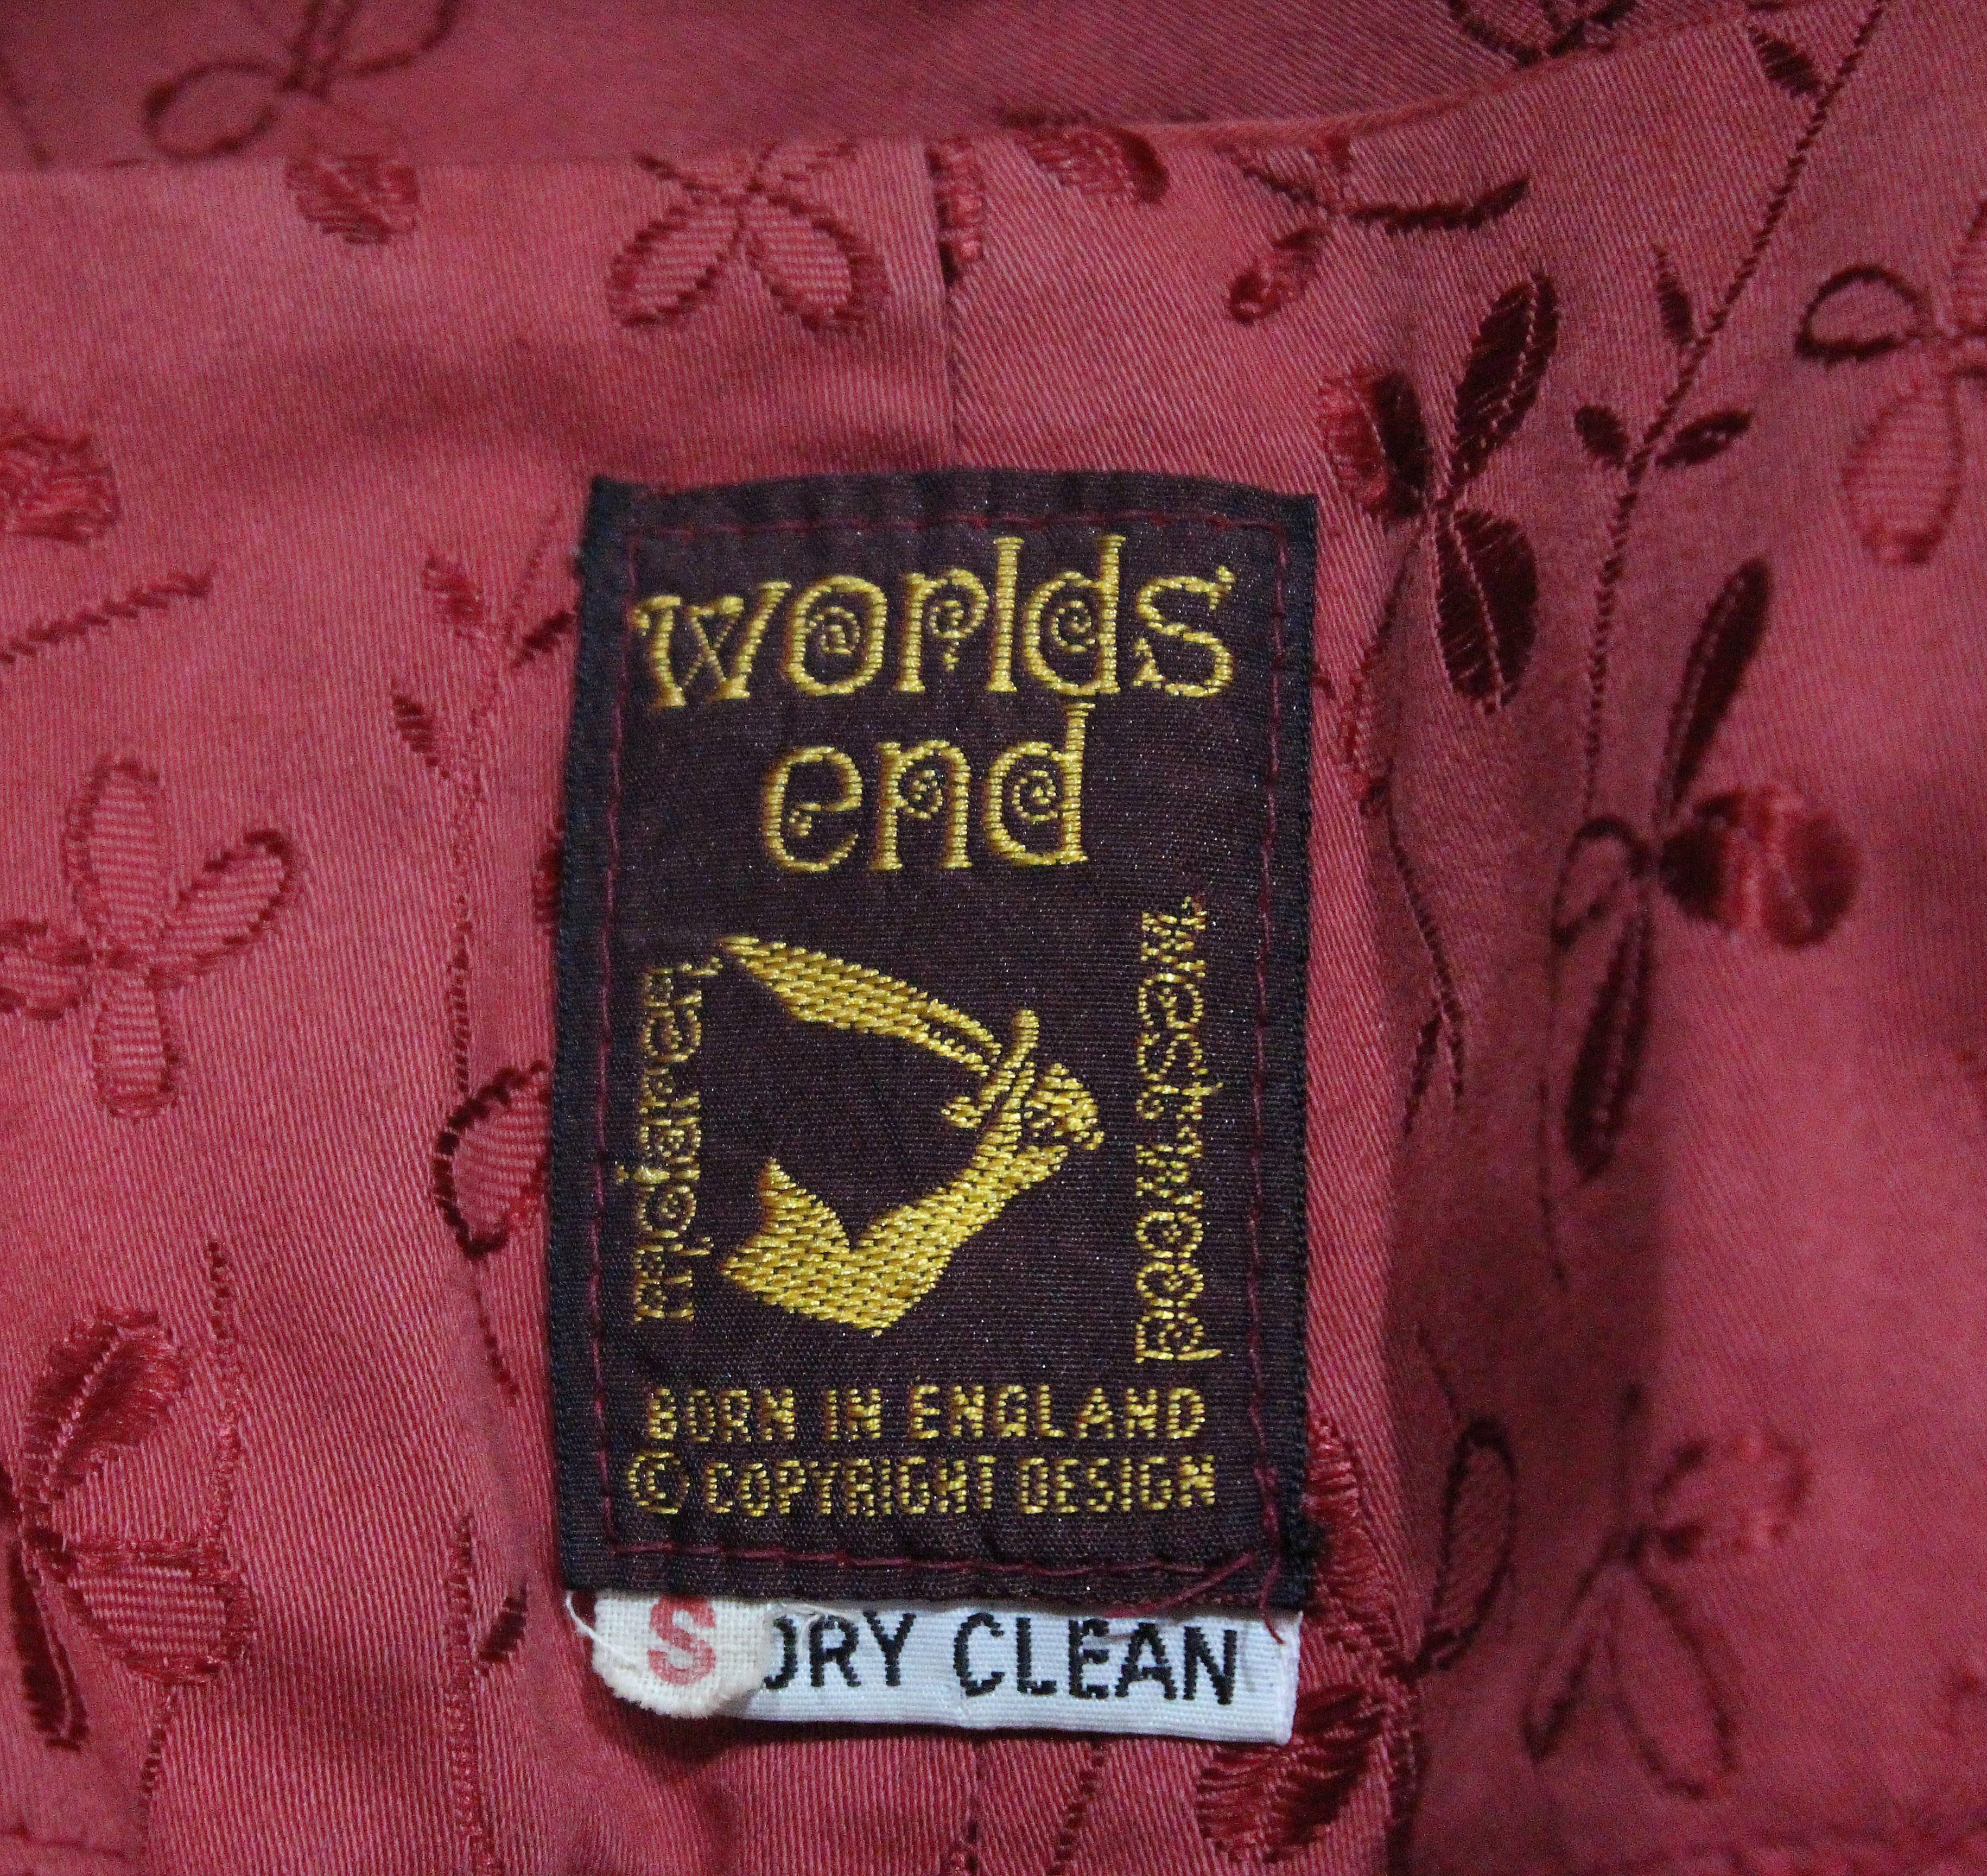 Brown Vivienne Westwood and Malcolm Mclaren pirate pants from World's End, c. 1981